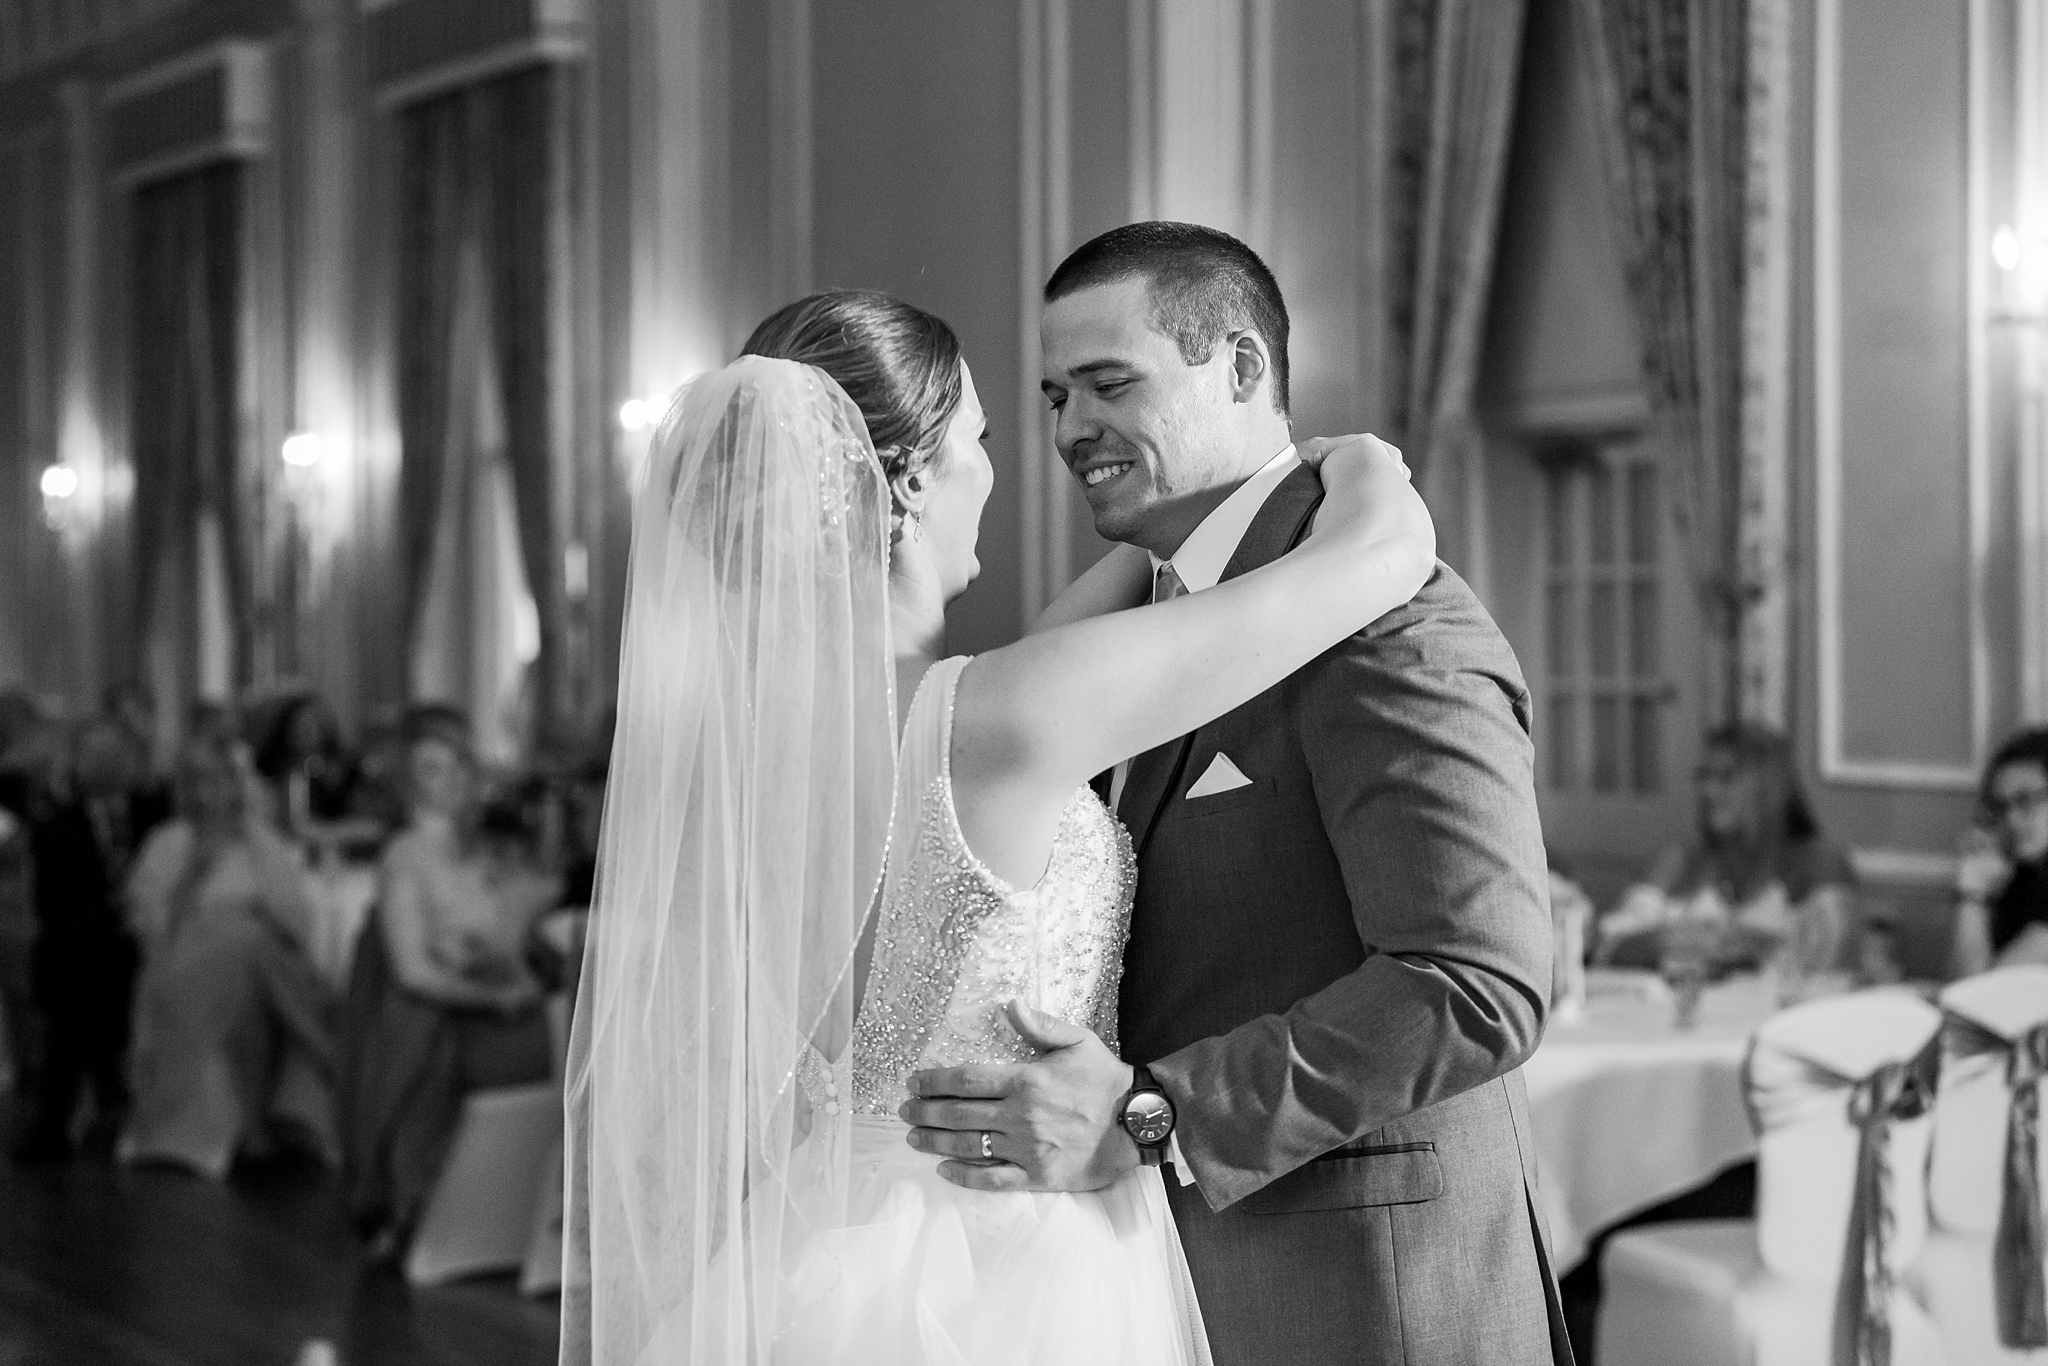 classic-intimate-fun-wedding-photos-at-the-meeting-house-grand-ballroom-in-plymouth-michigan-by-courtney-carolyn-photography_0097.jpg